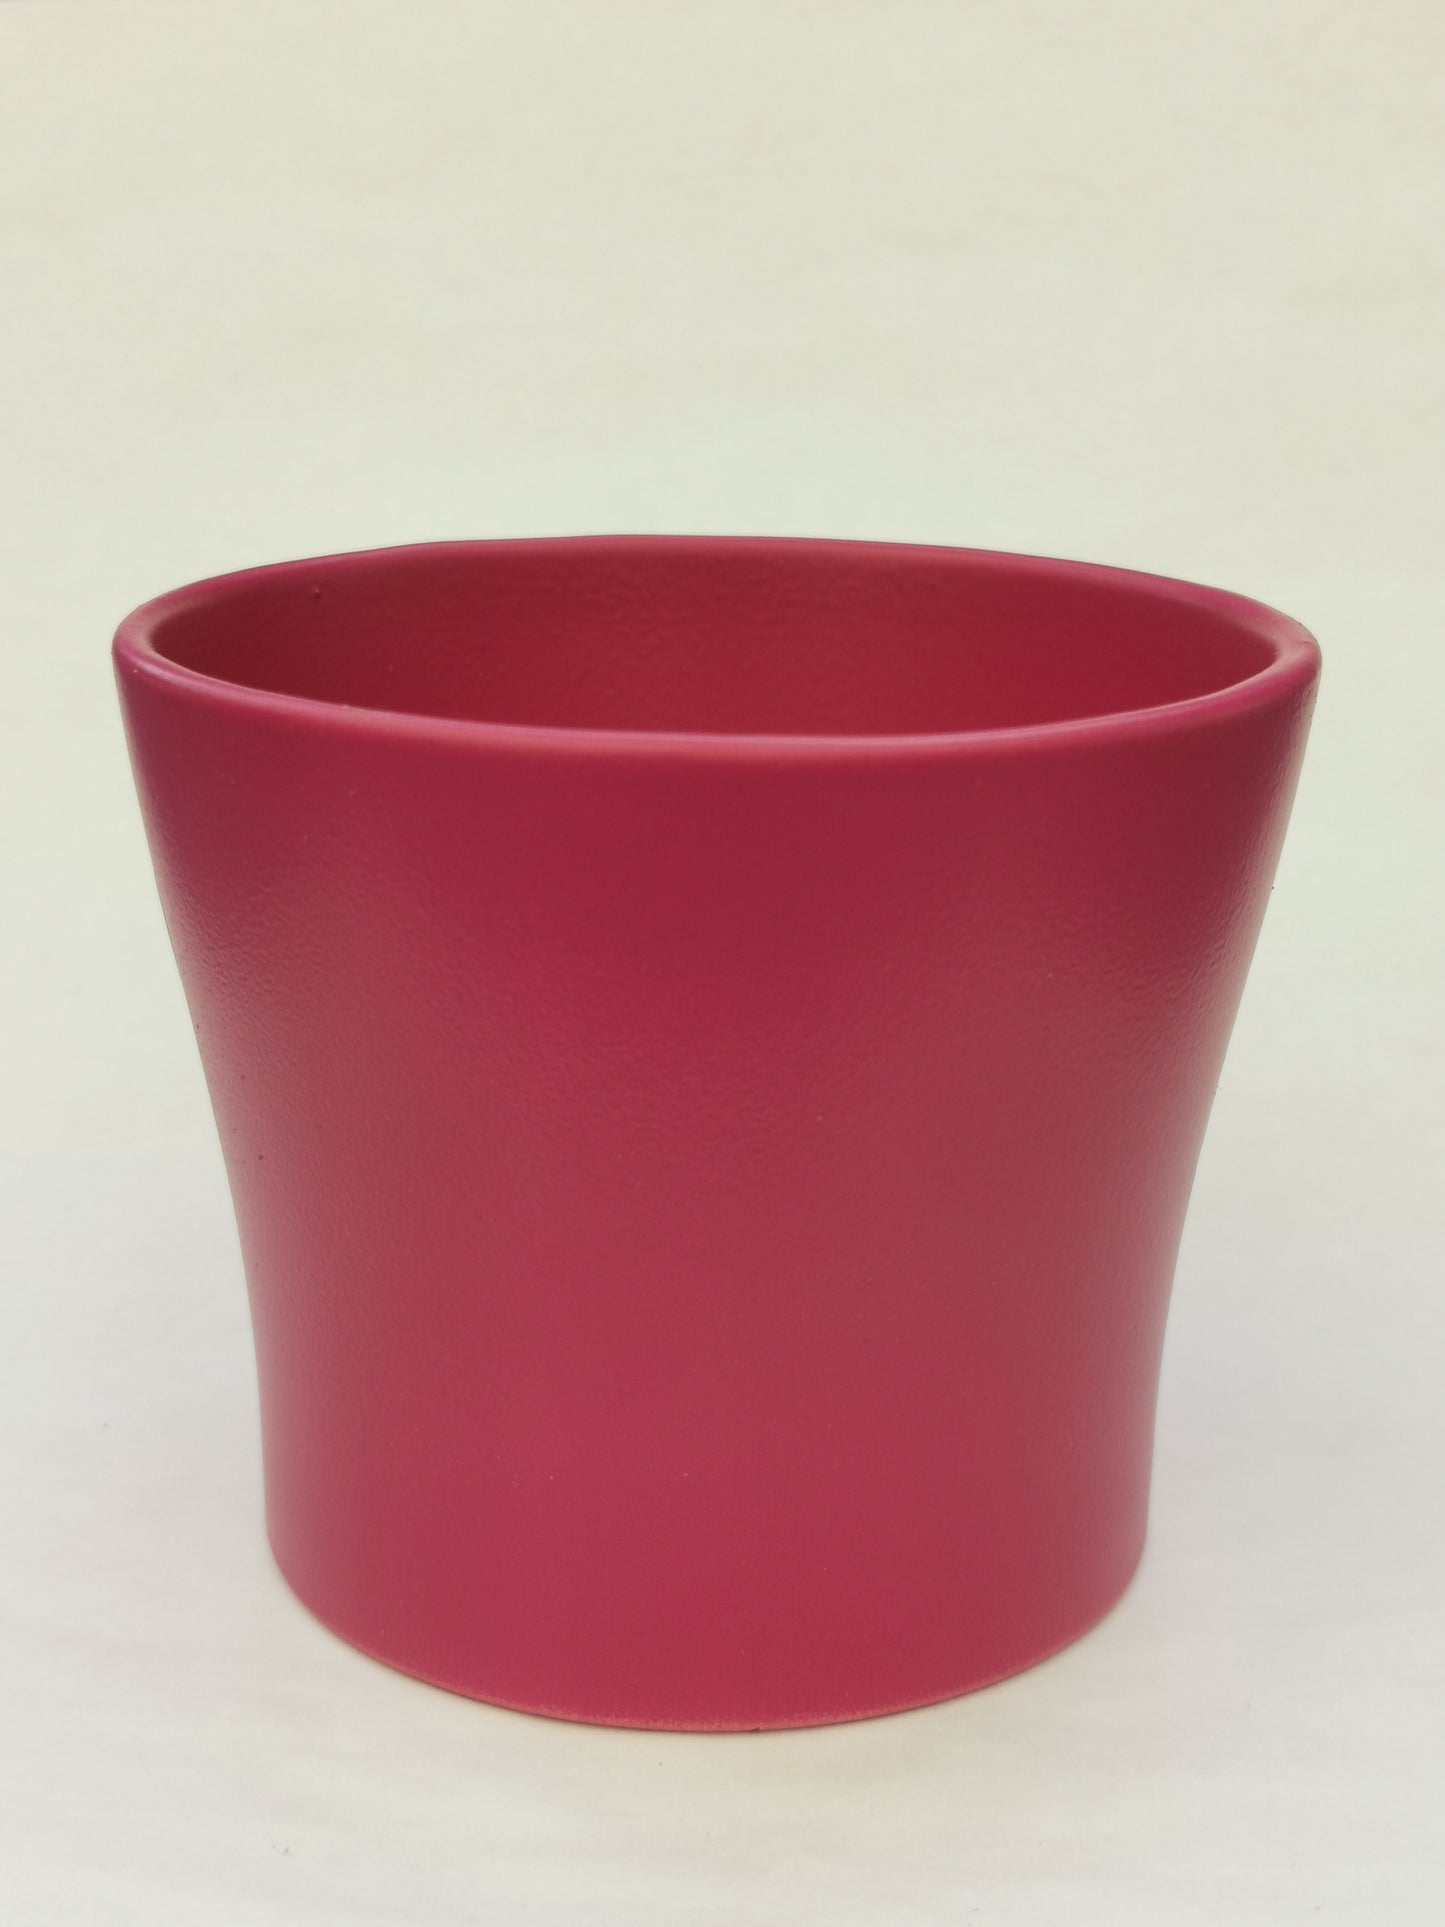 Stylish Ceramic Cache/Cover pots - Ruby Red - 11cm